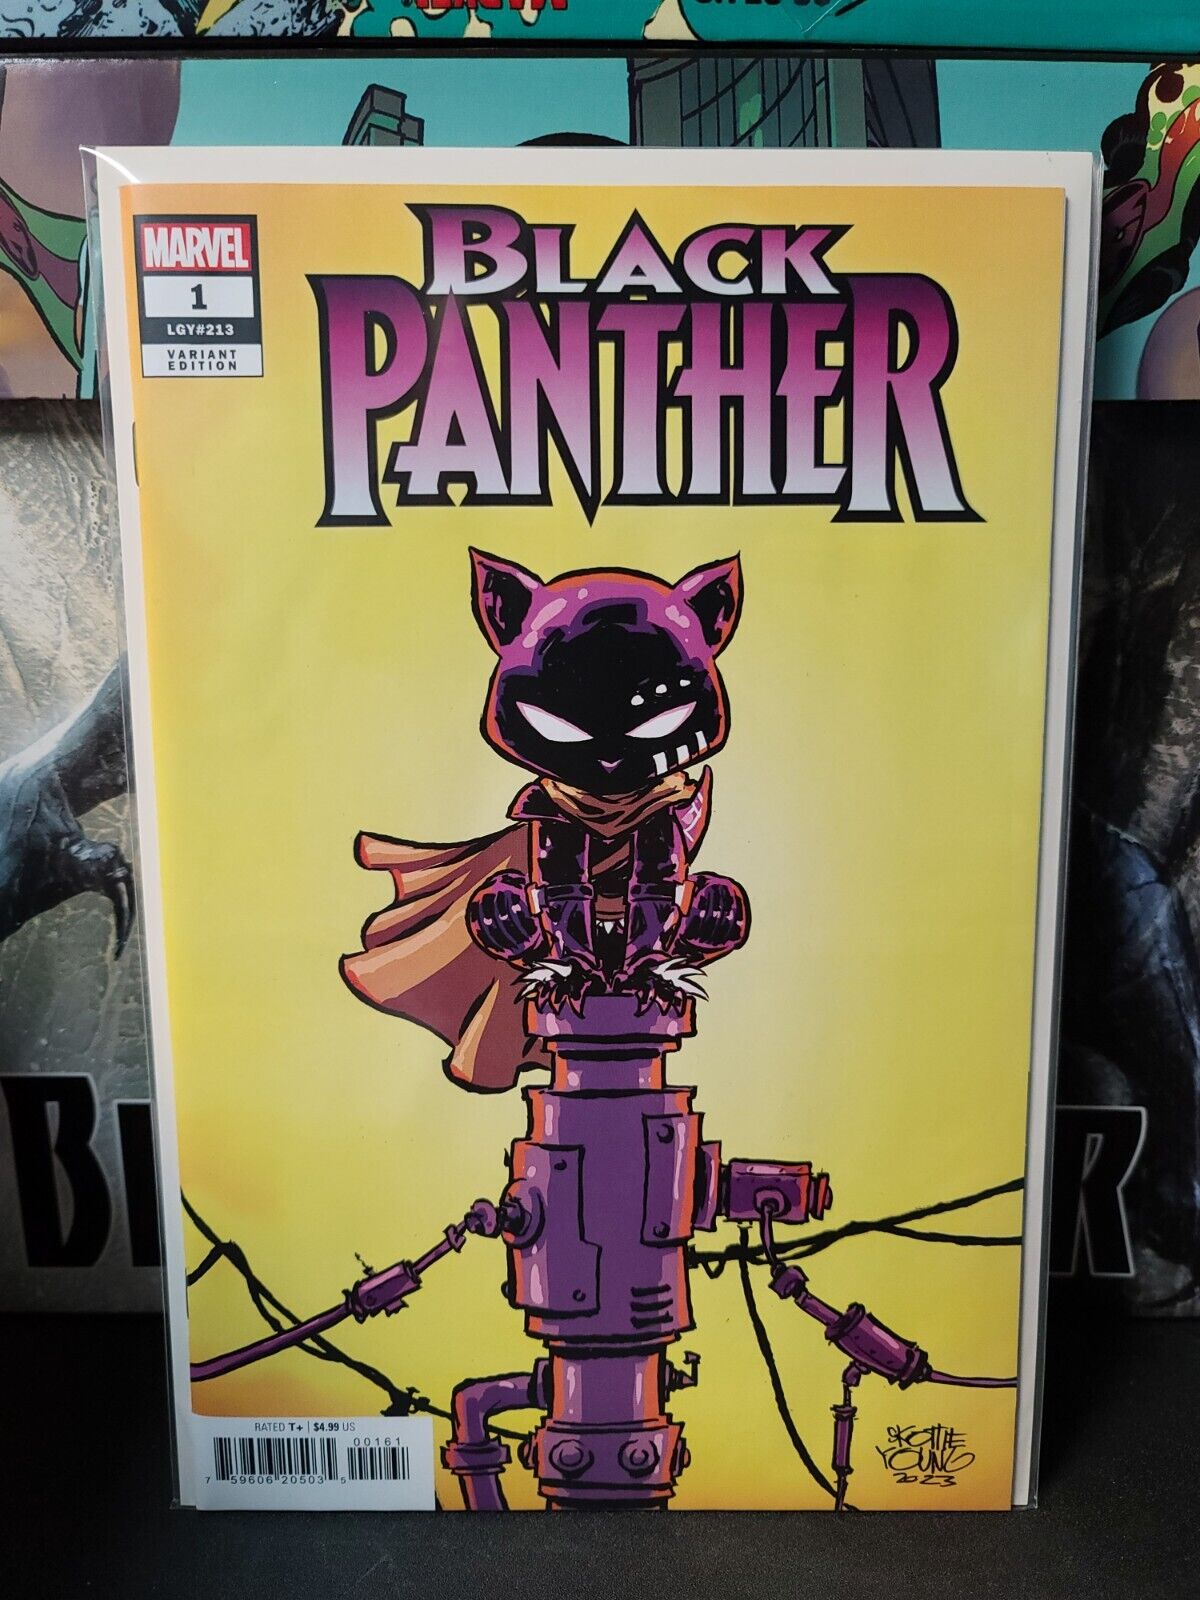 Black Panther #1 - LGY 213 - Marvel - 2023 - Skottie Young Variant